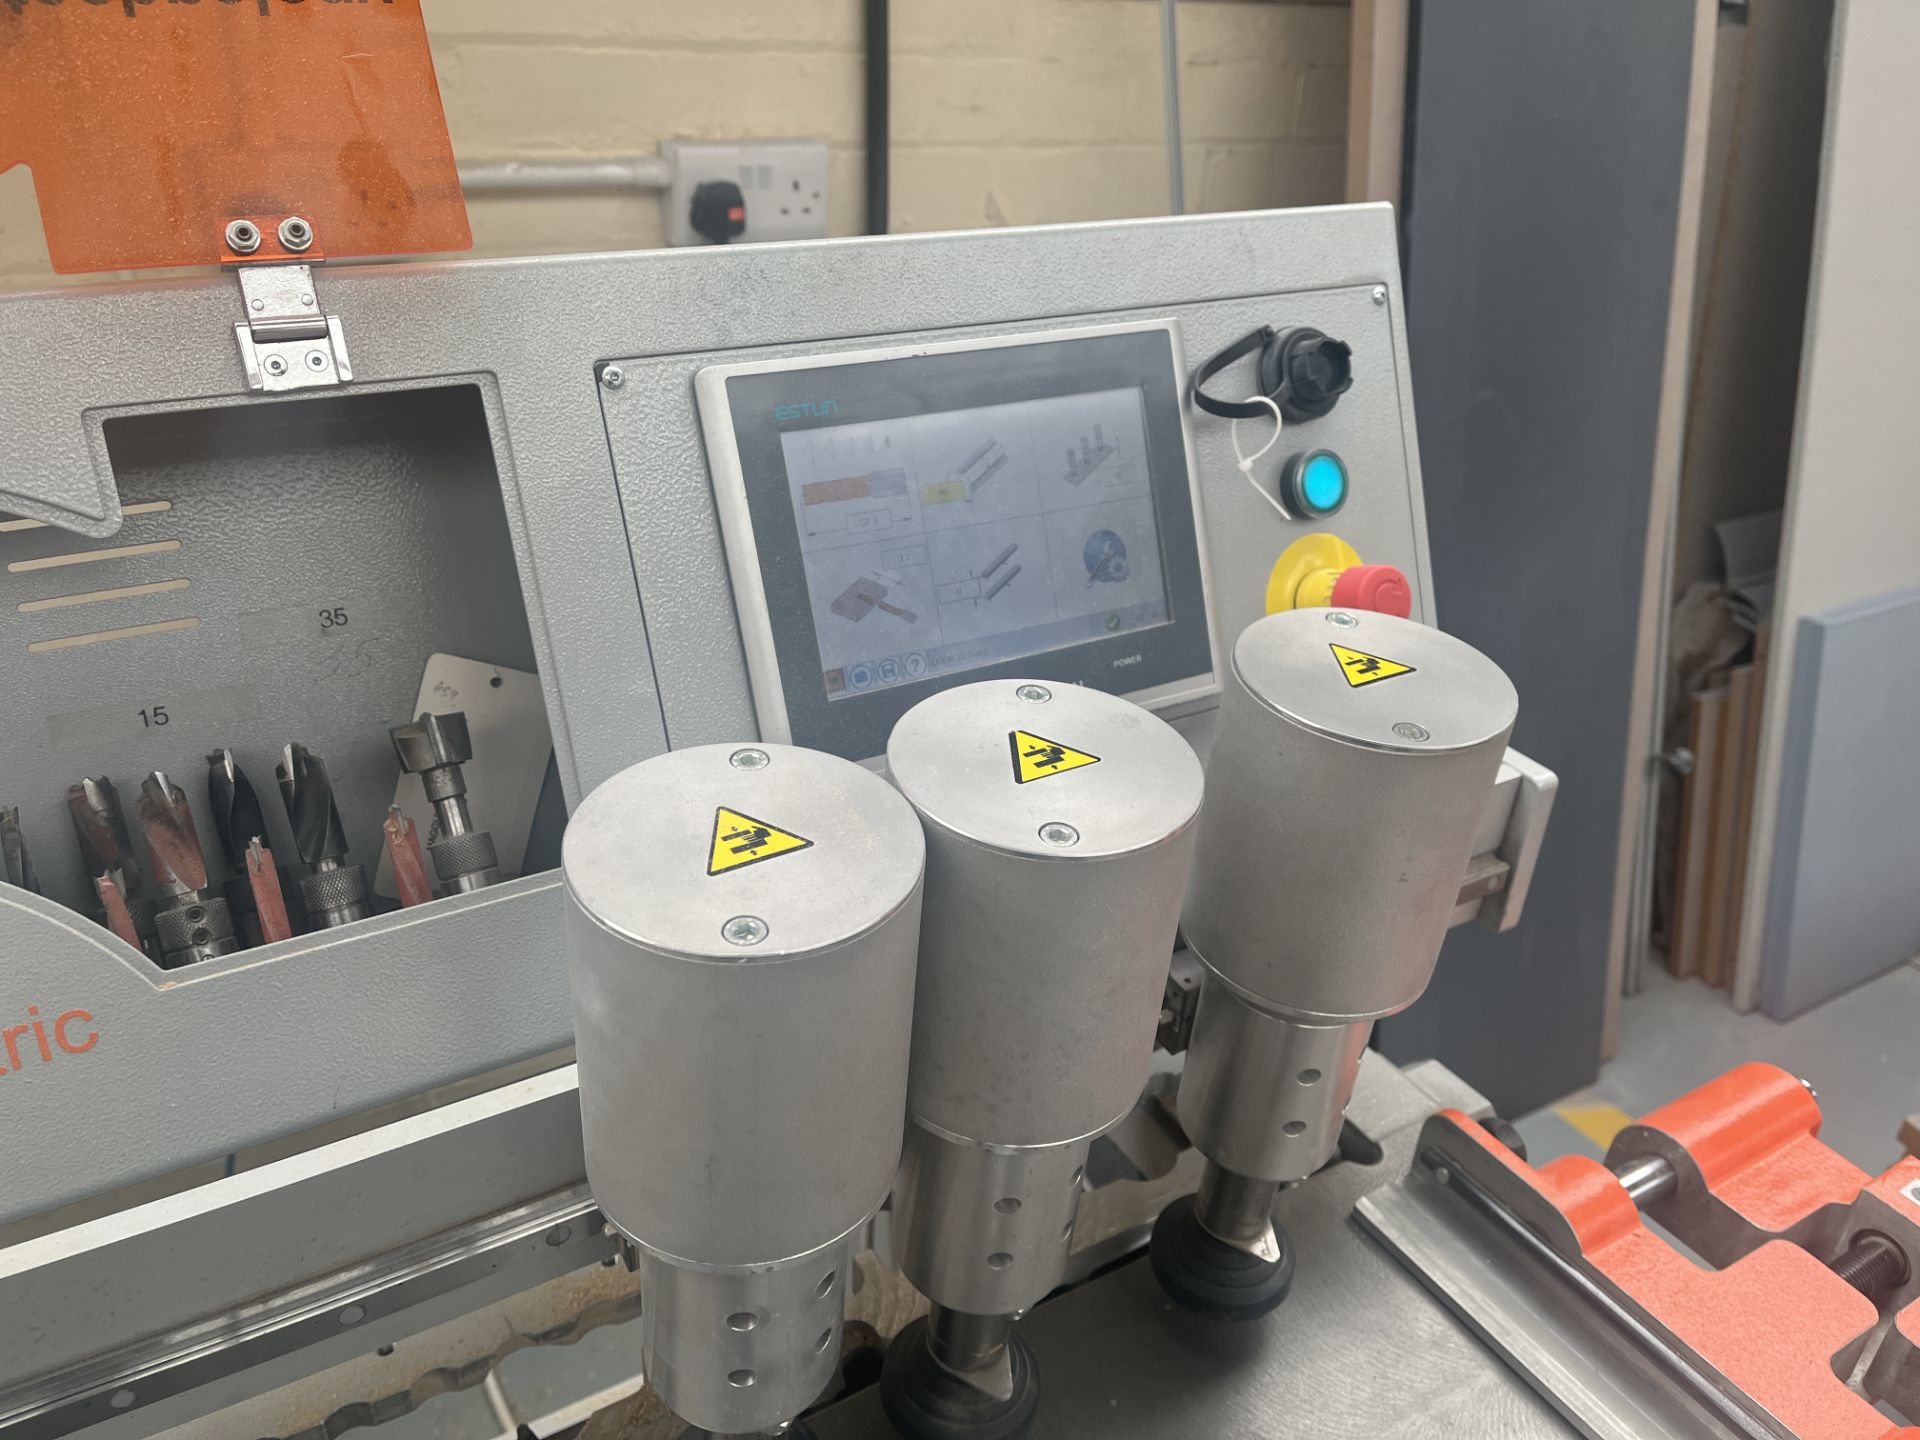 2019 MAGGI 21 TECHNOLOGY FLEX VIEW ROUTER BORING SYSTEM WITH BITS AND CLAMPS - Image 4 of 5